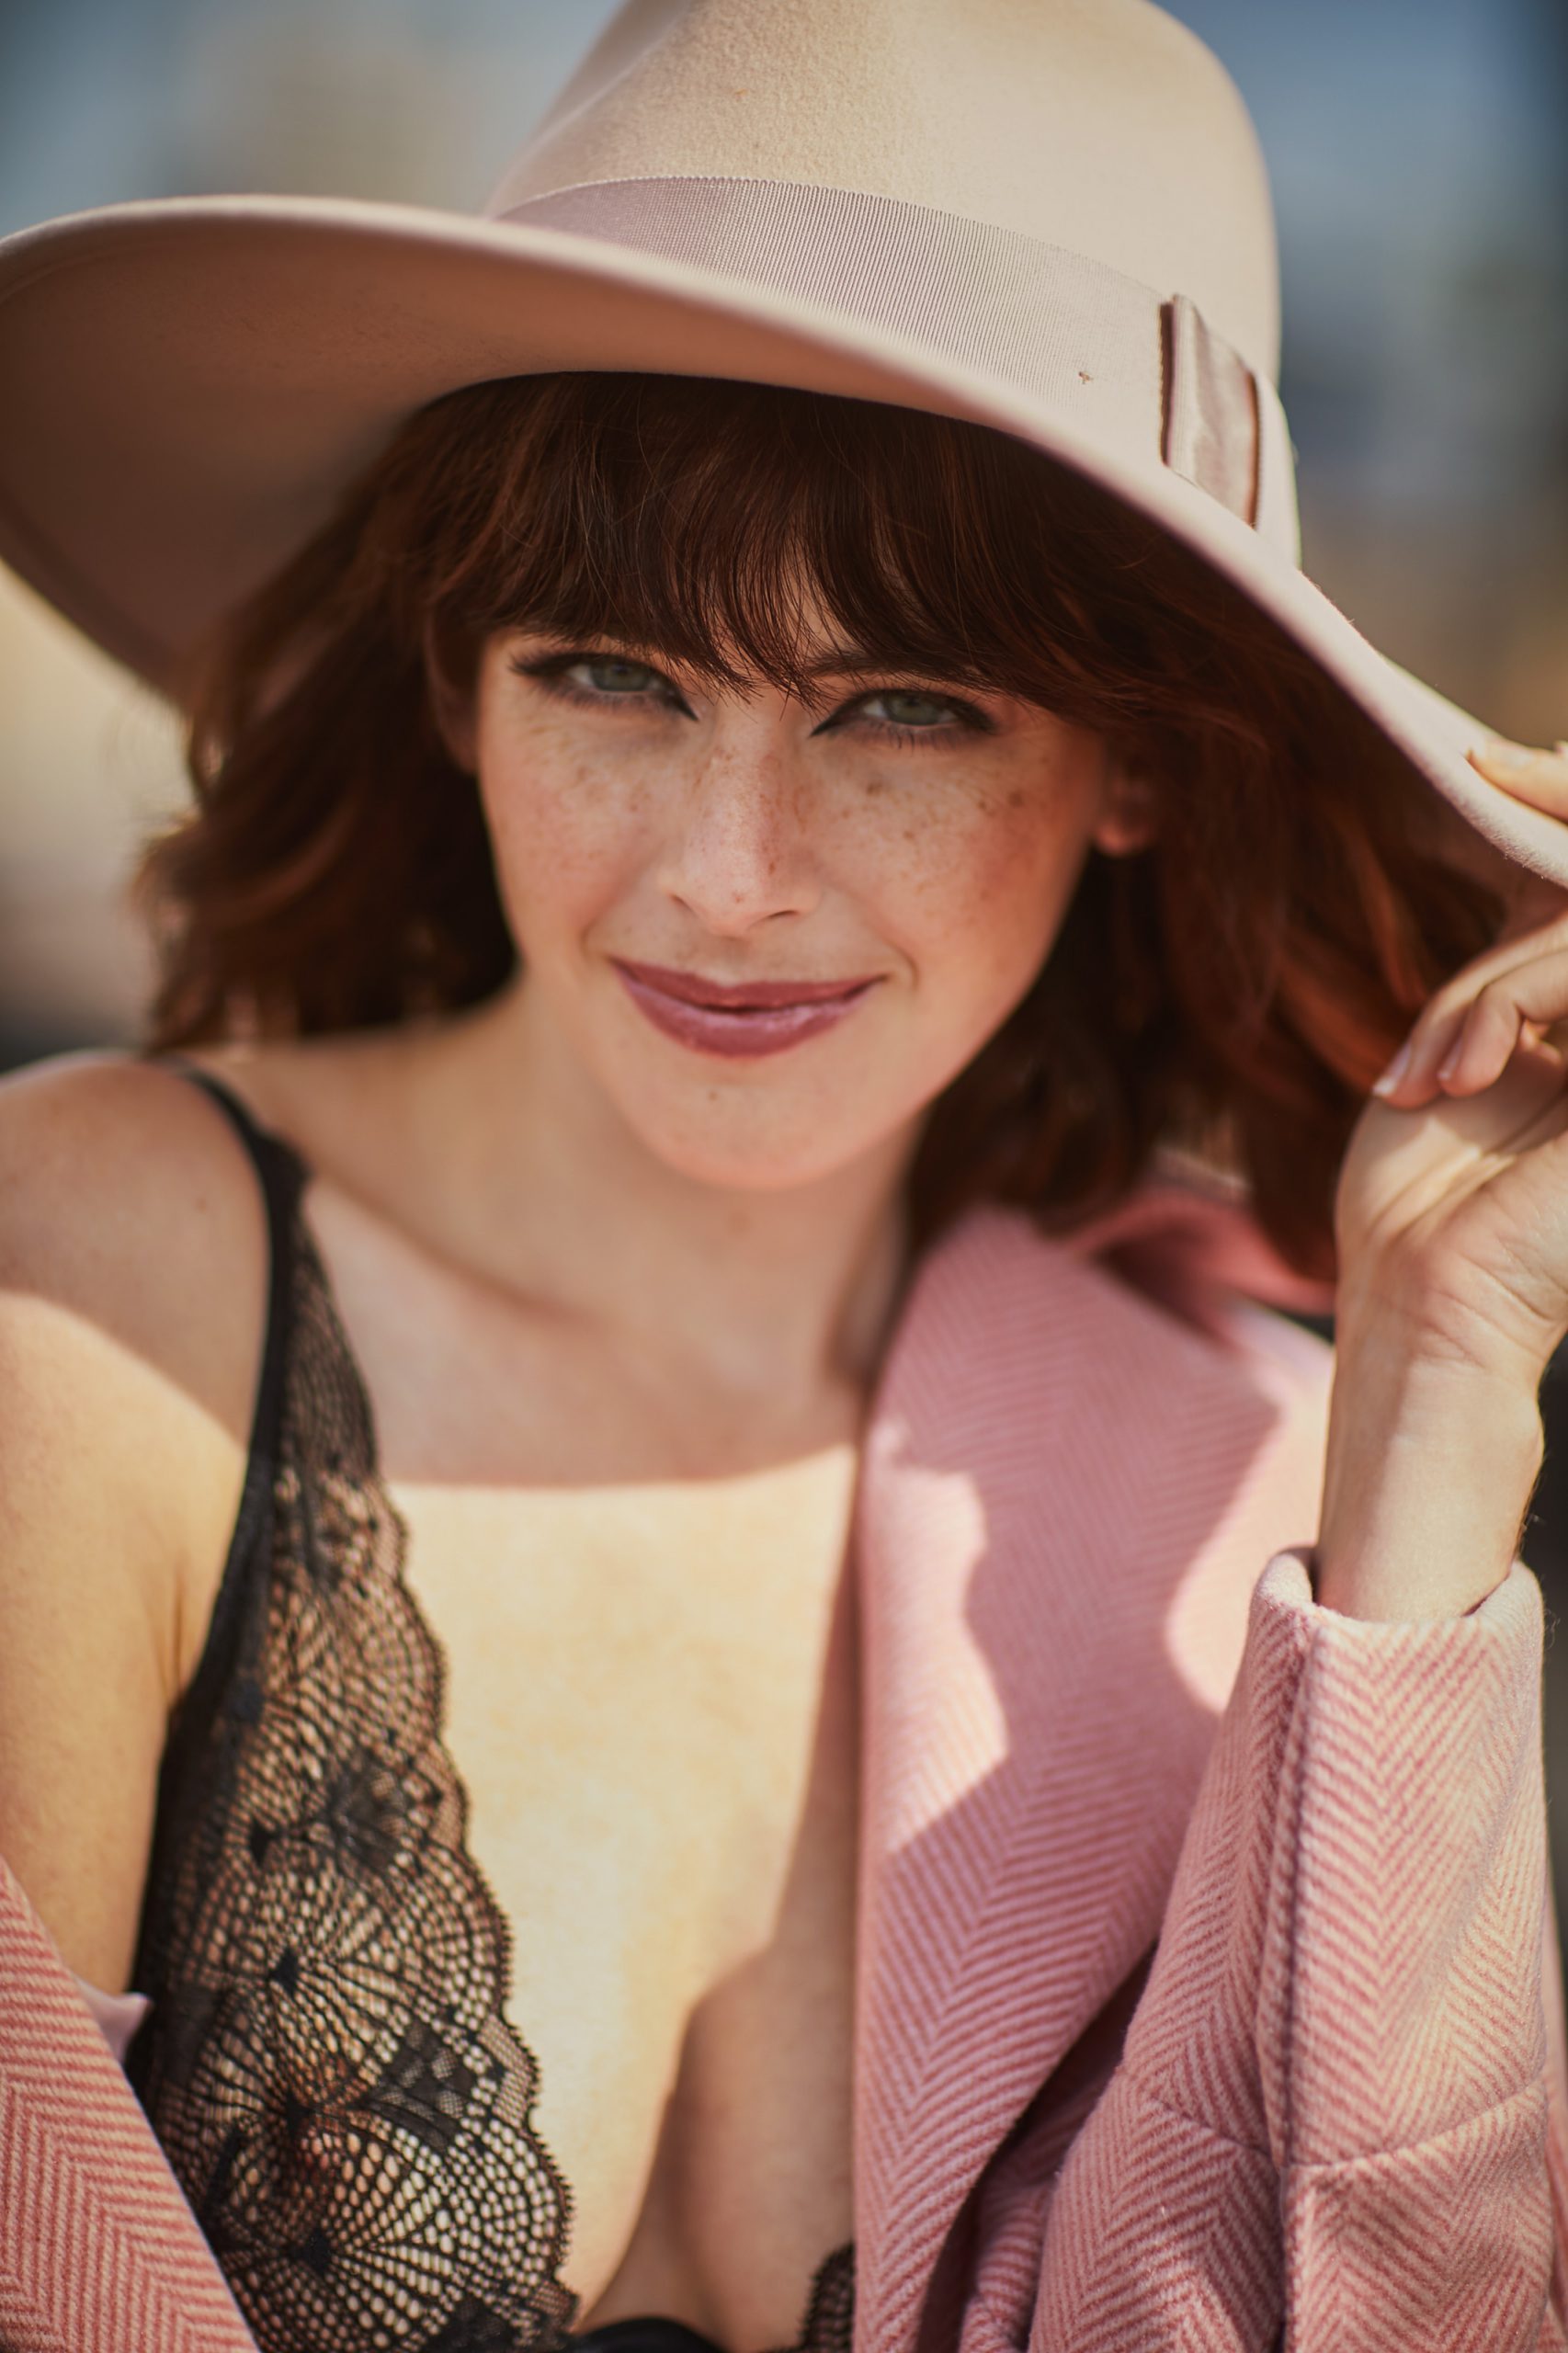 woman with summer hat and boudoir lingerie